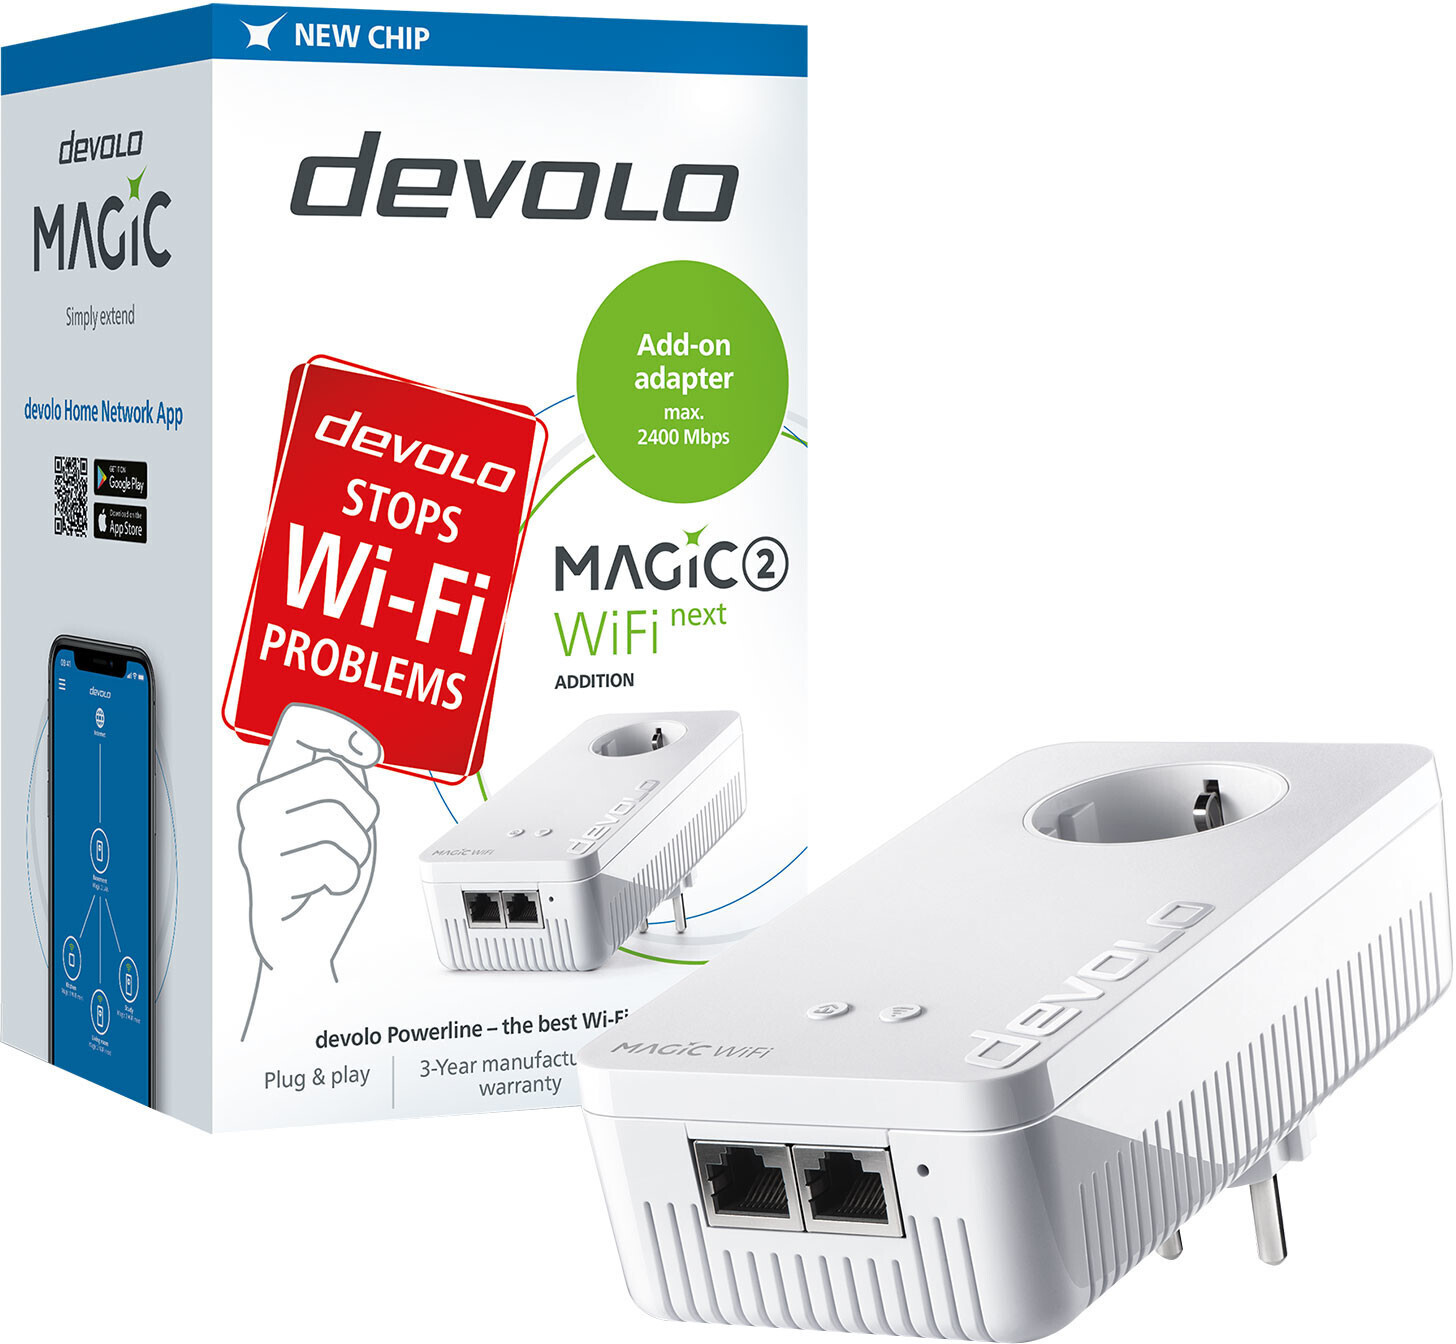 Buy devolo Magic 2 WiFi next from £99.95 (Today) – Best Deals on